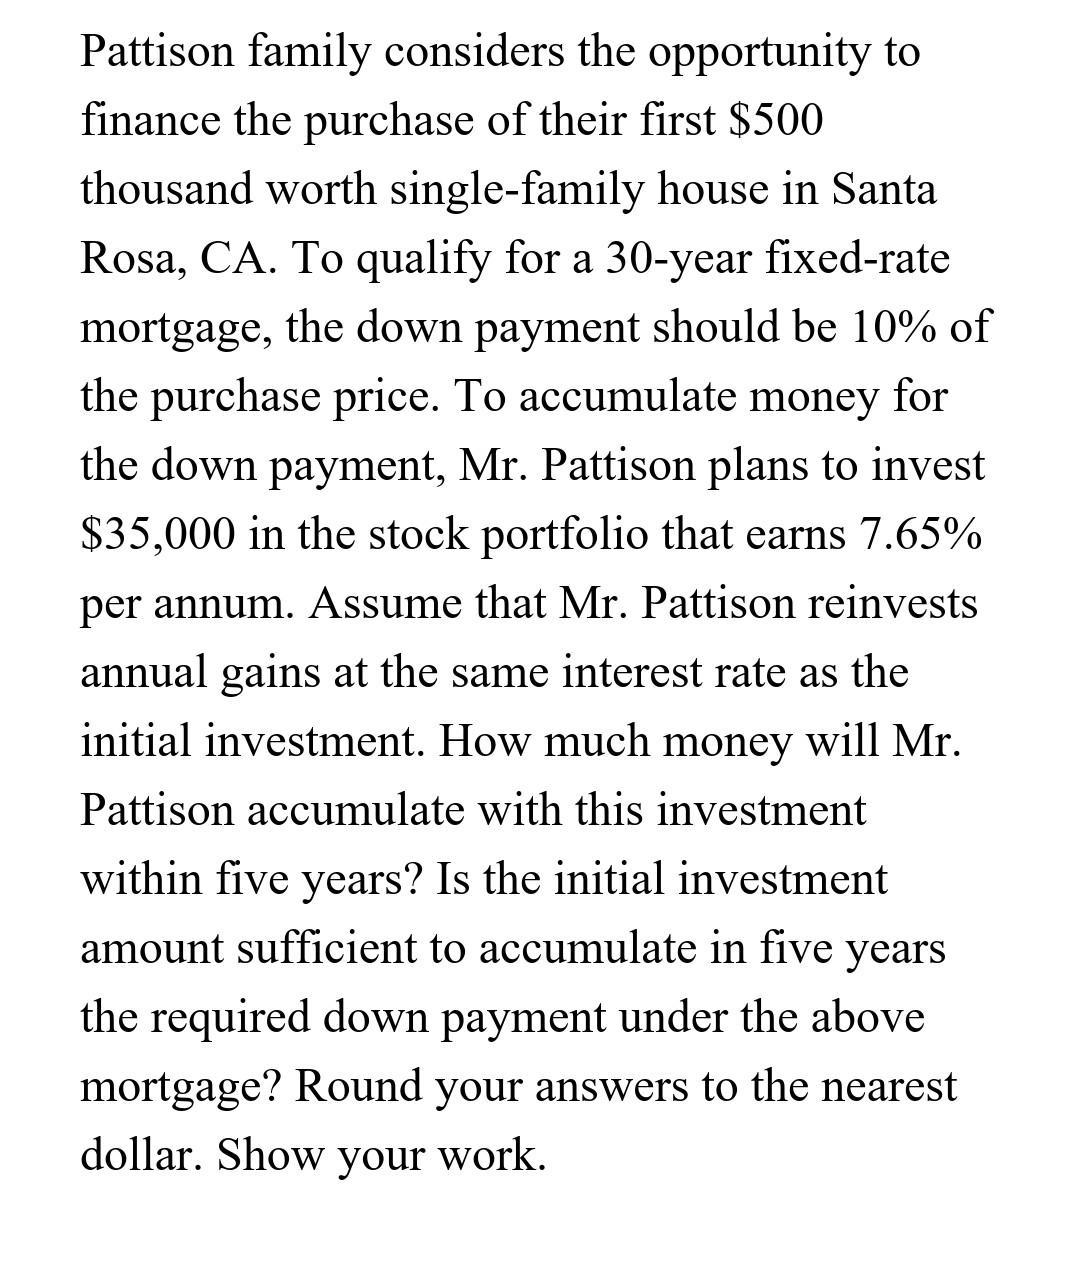 Pattison family considers the opportunity to finance the purchase of their first $500 thousand worth single-family house in S